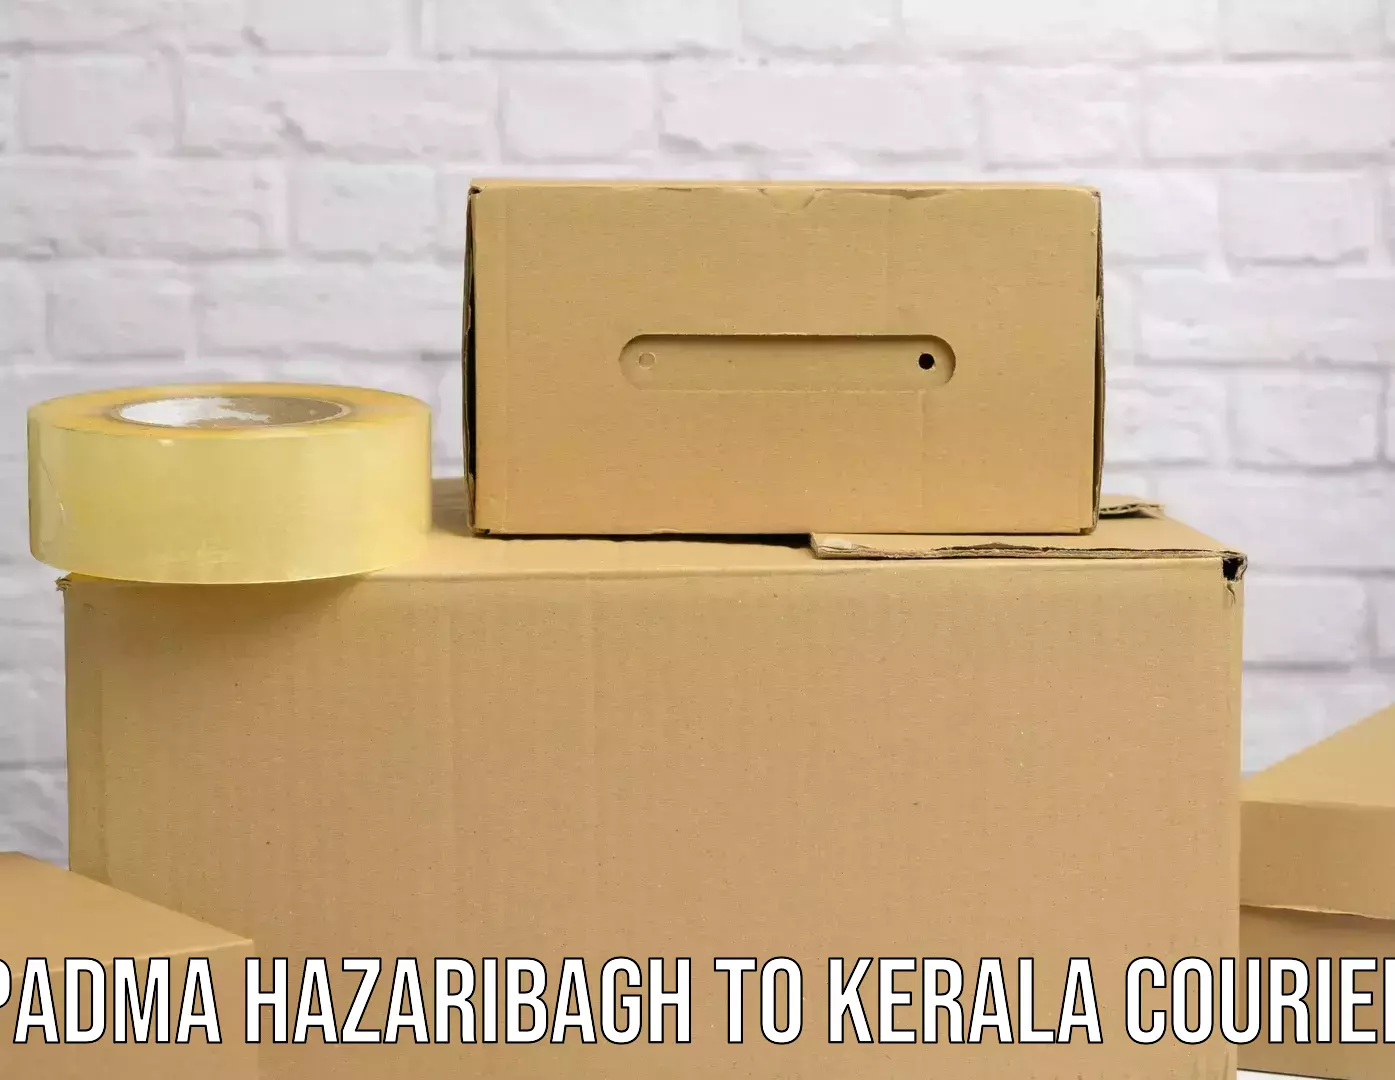 Express delivery network Padma Hazaribagh to Kerala